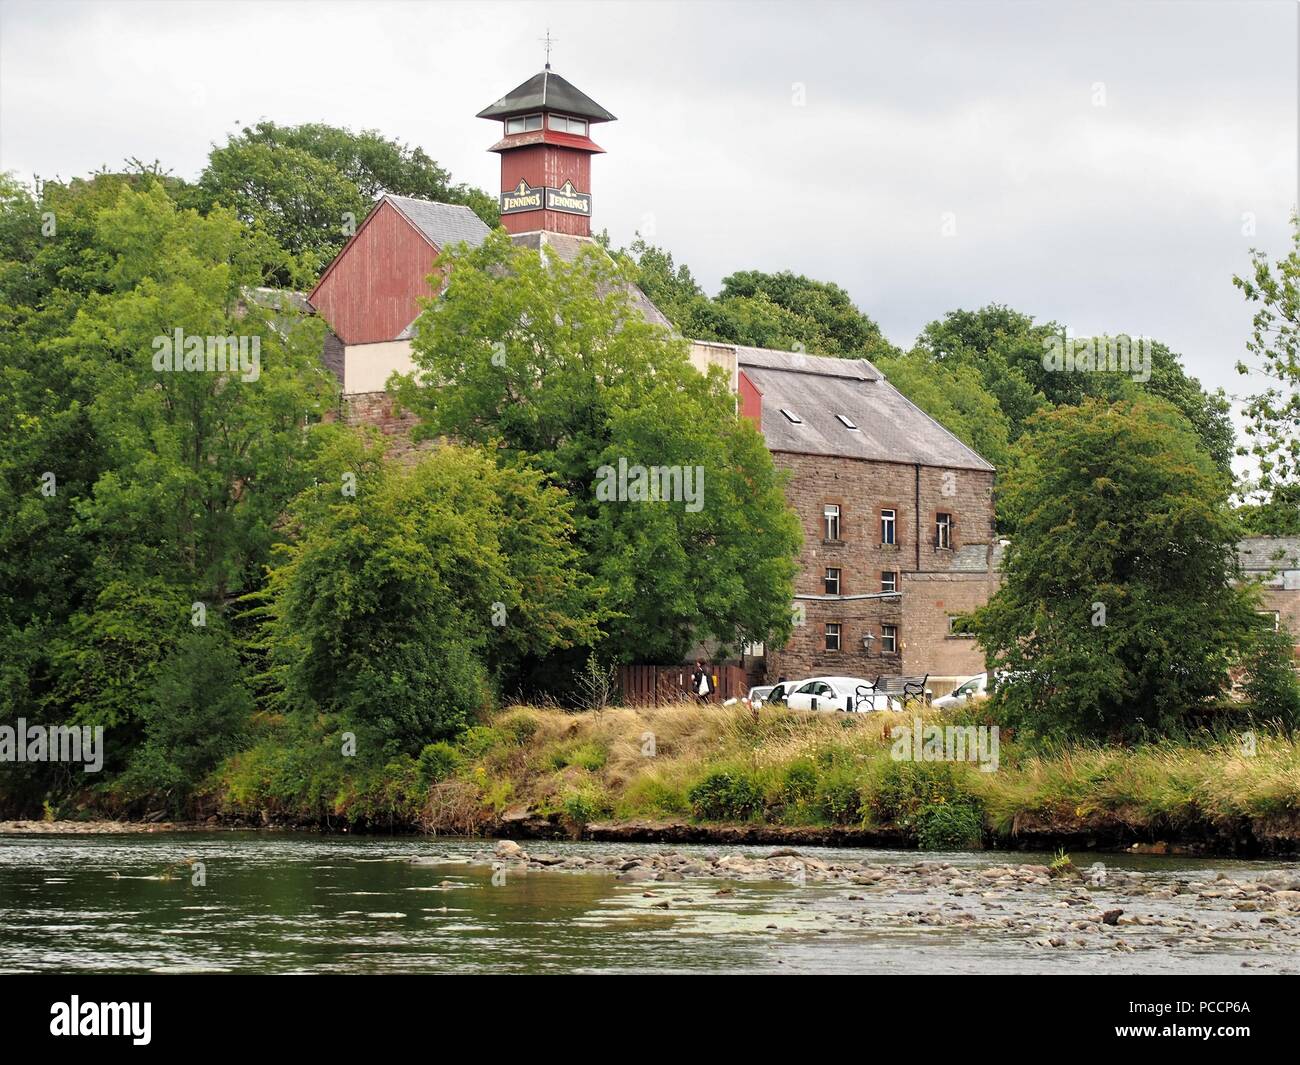 The Buildings of Jennings Brewery from across the River Derwent, Cockermouth, Cumbria, United Kingdom Stock Photo